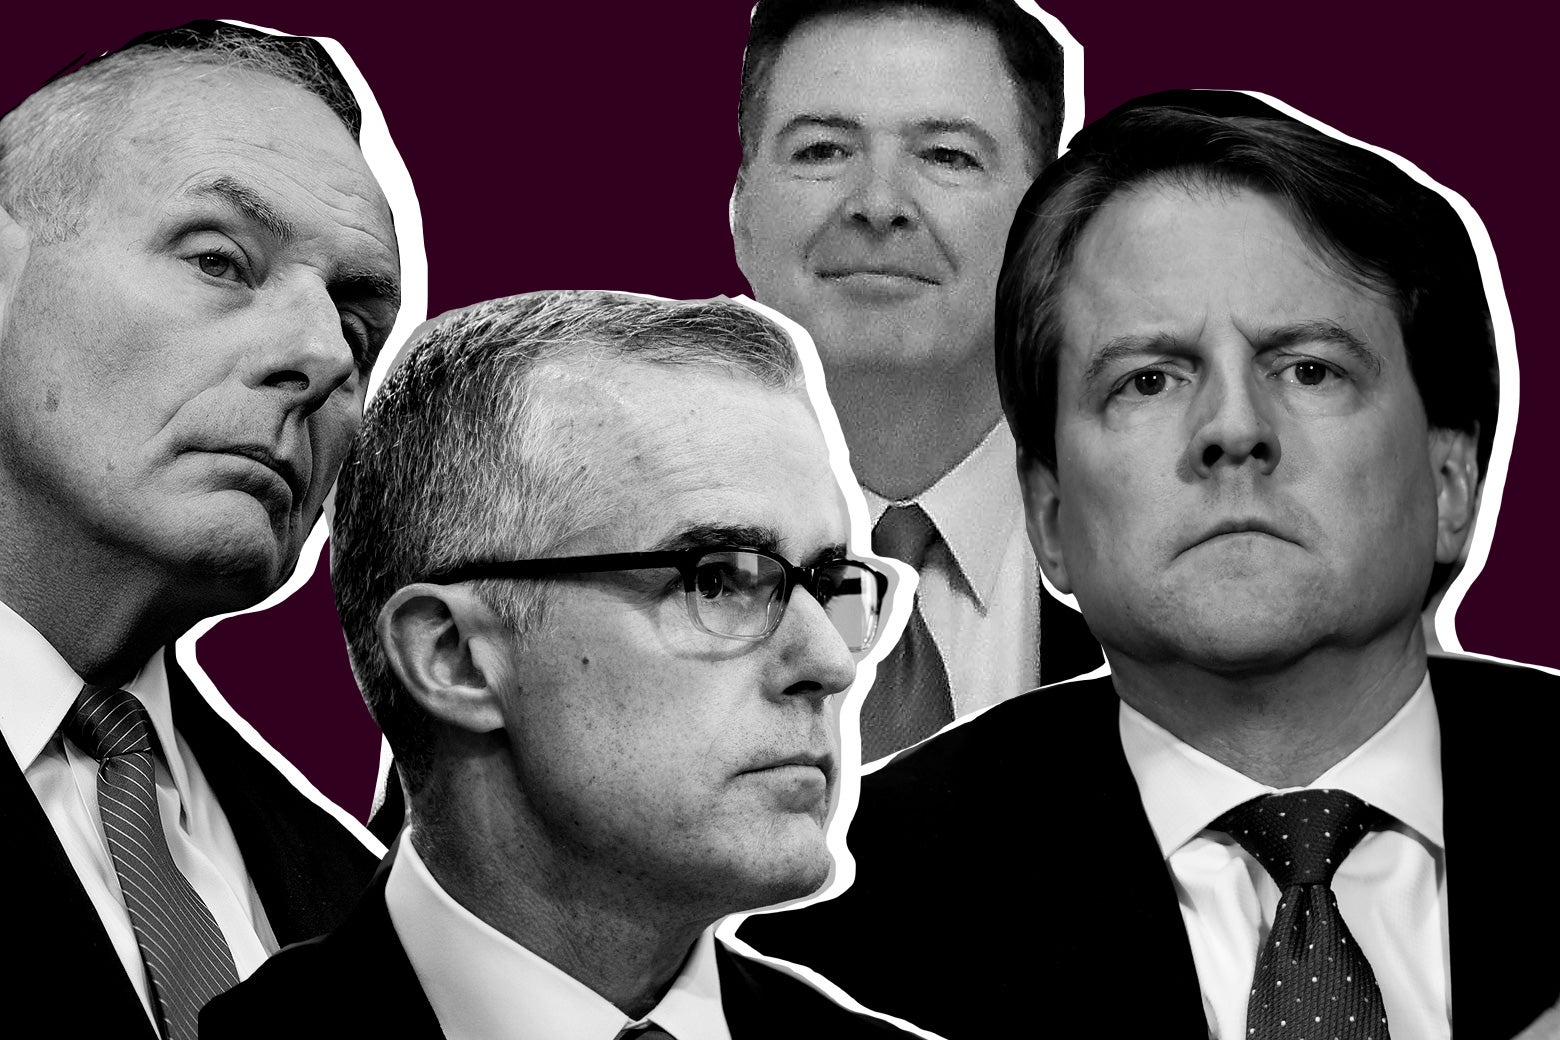 Photo collage of Kelly, McCabe, Comey, and McGahn.